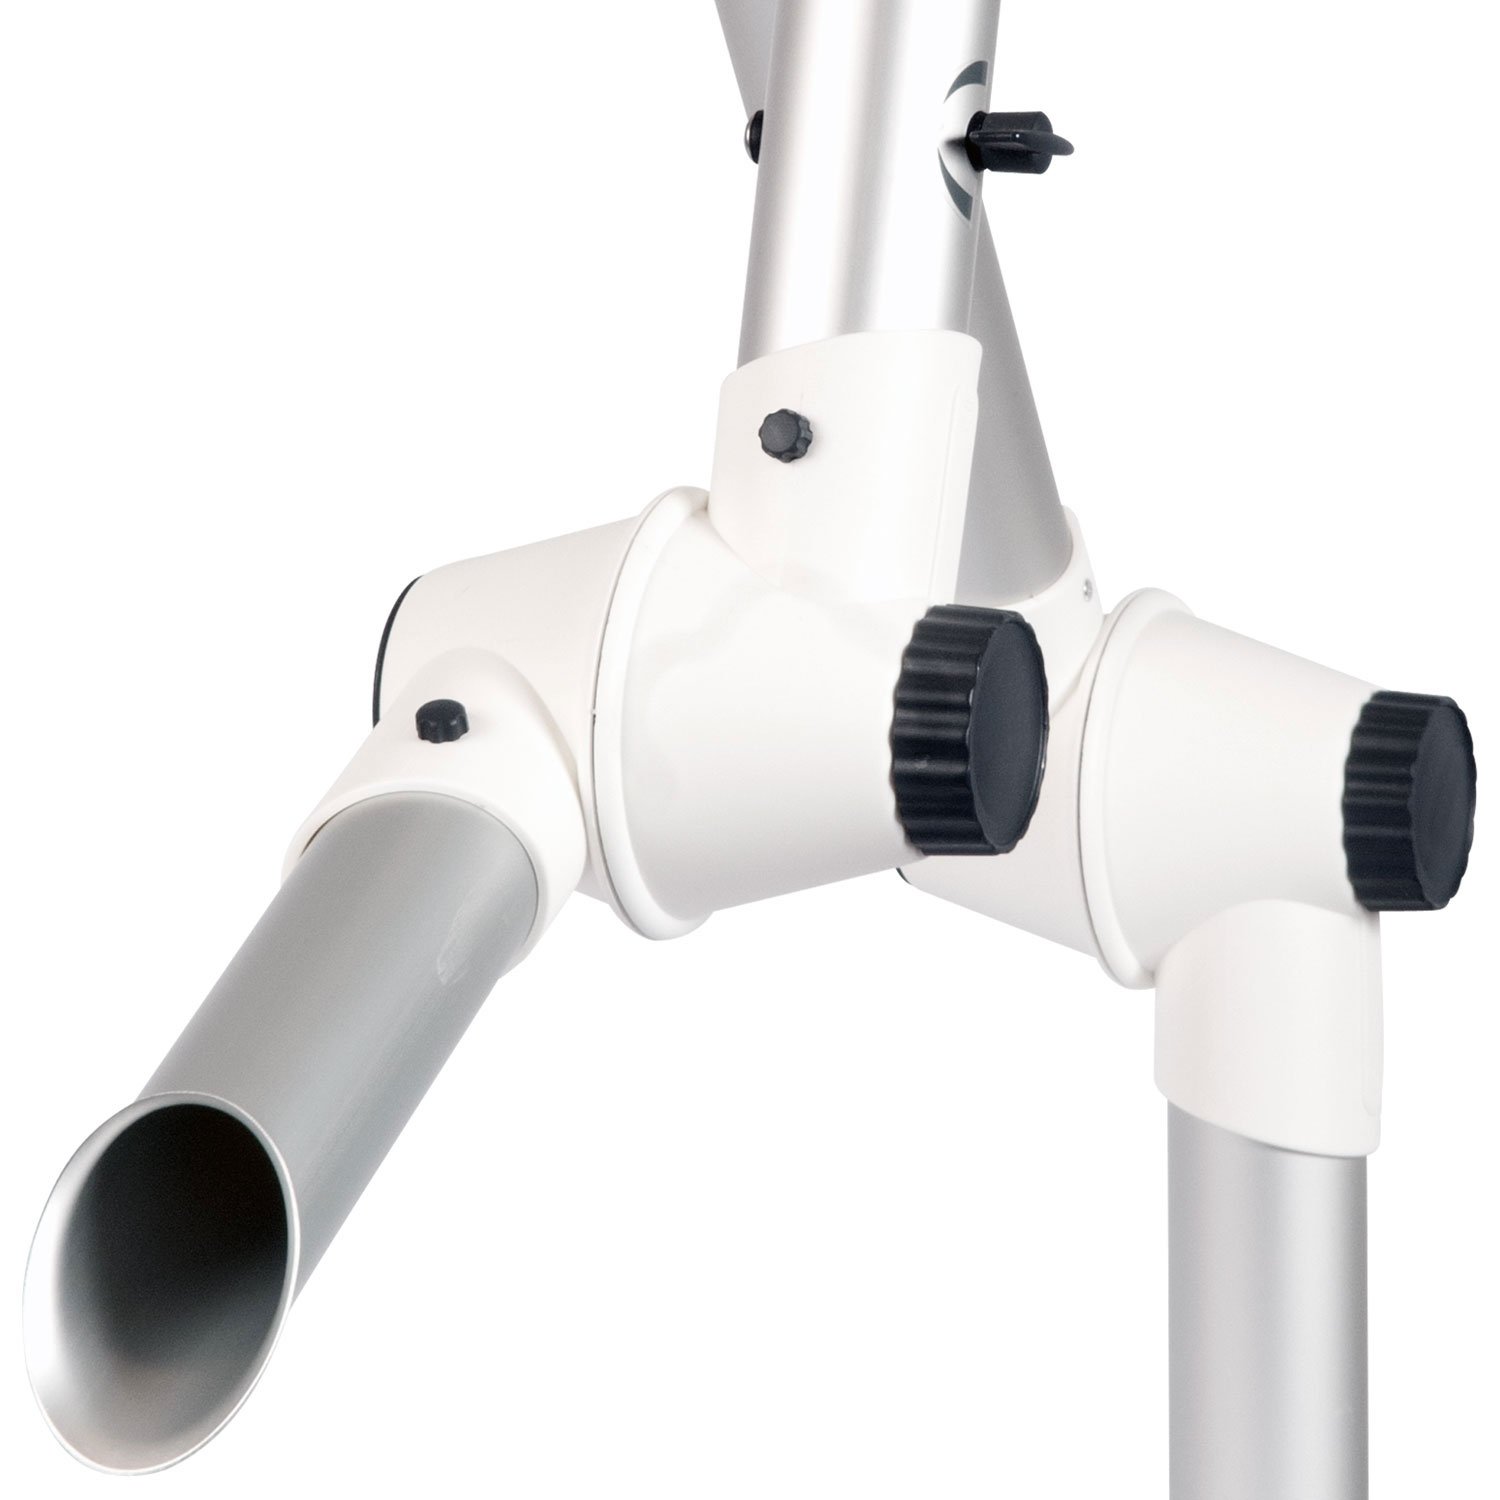 Terfu Extraction Arm for Laboratory Environments | AIRPLUS Industrial